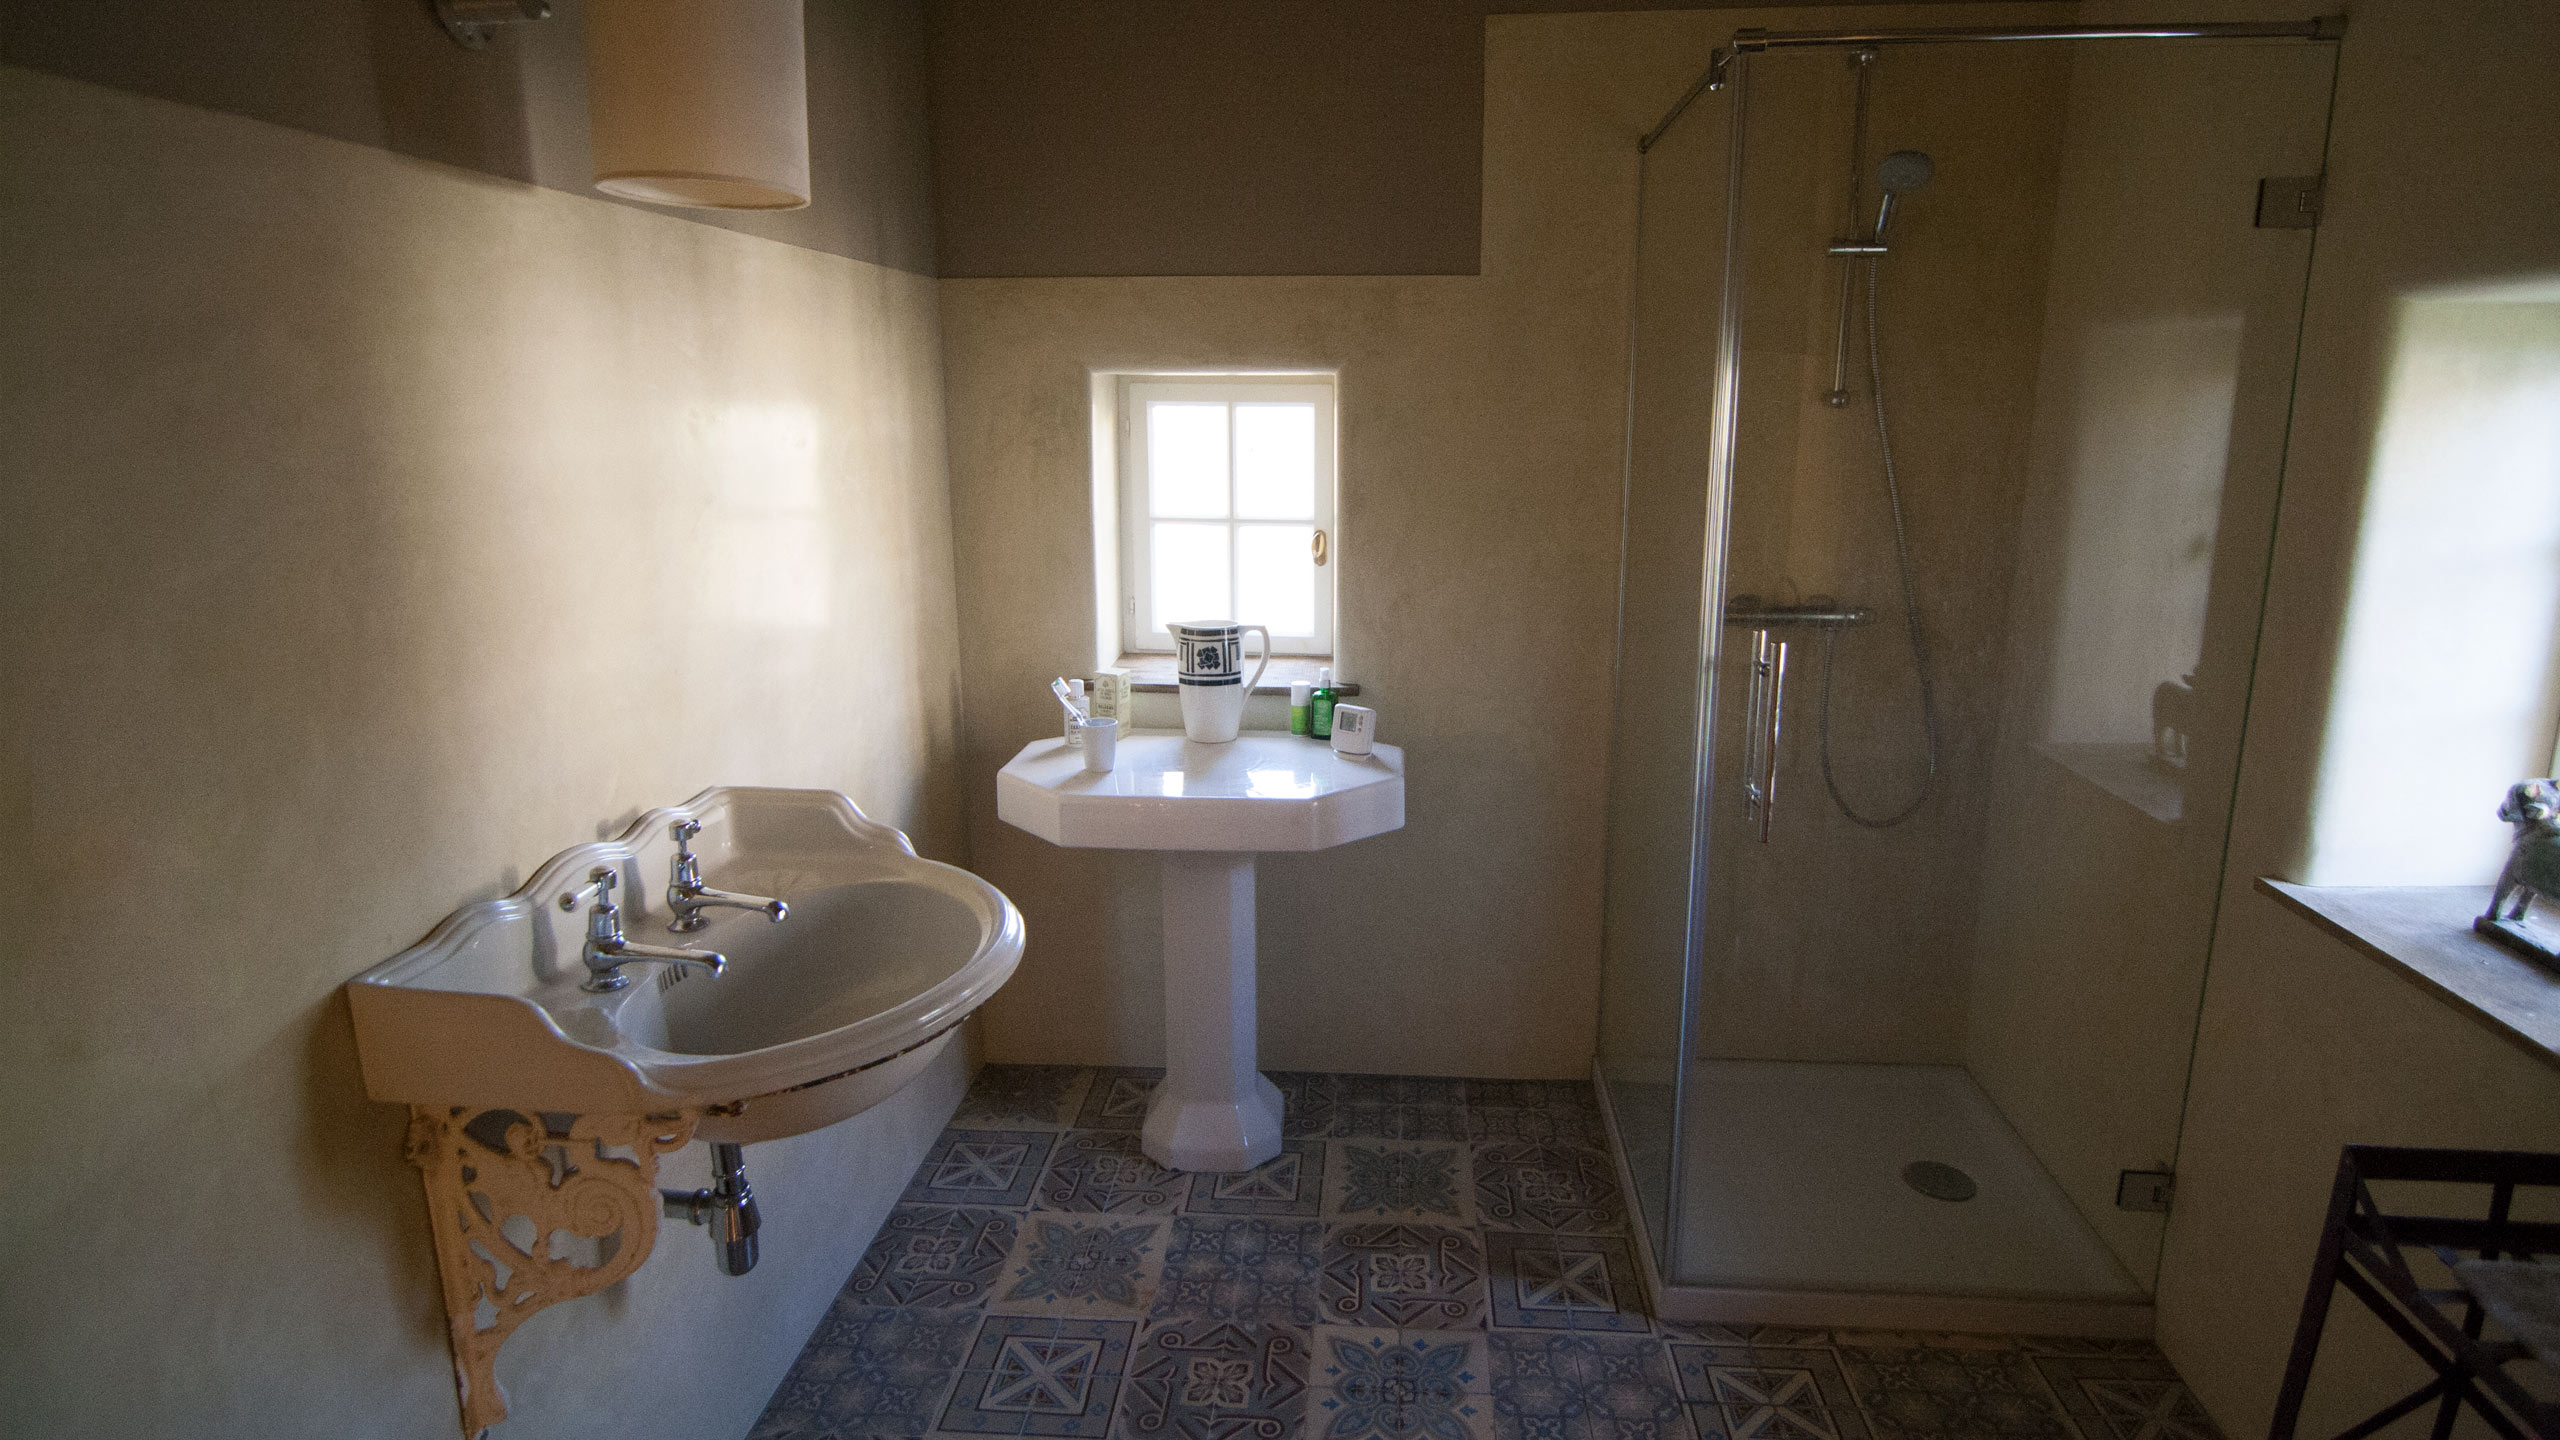 Residential - Cozy Guest Bathroom, Overview